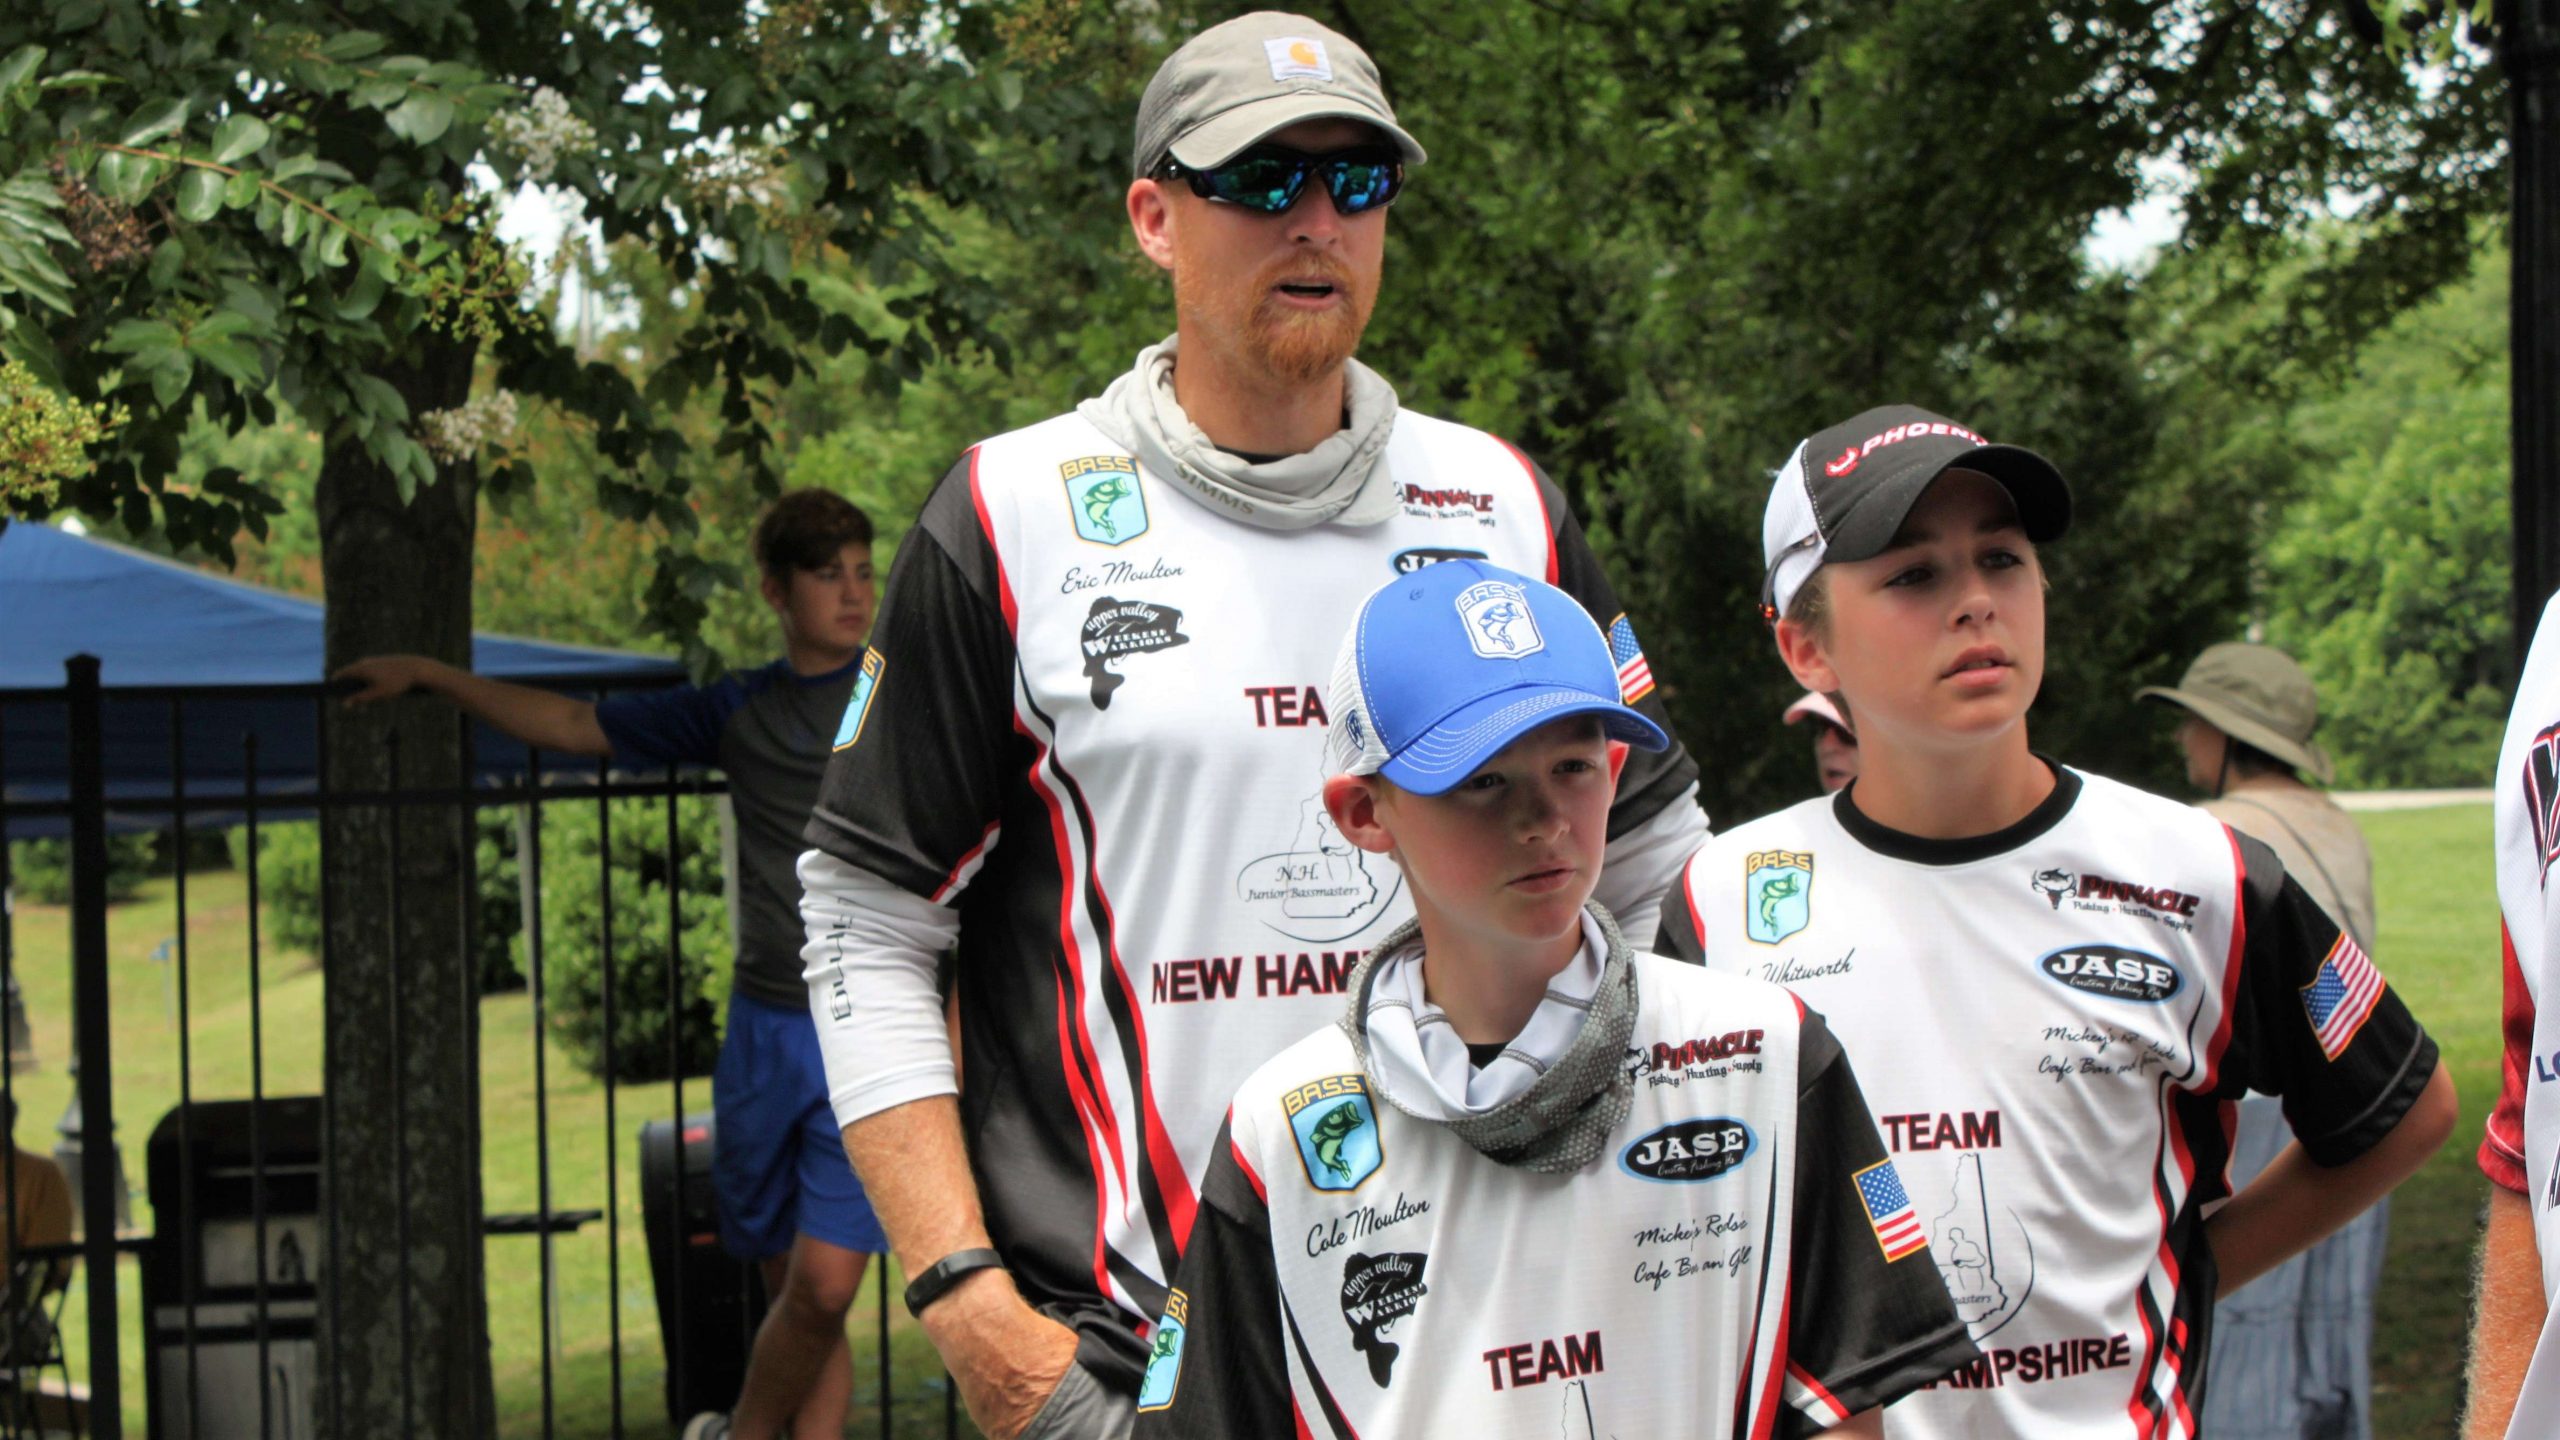 In all, teams from 28 states and Canada traveled to Huntingdon, Tenn. to take part in the championship. The field was set at 51 teams and 101 anglers. Some came from nearby, while others traveled long distances to fish. Among them were the New Hampshire team of Cole Moulton and Ryder Whitworth. They are pictured with captain Eric Moulton.
